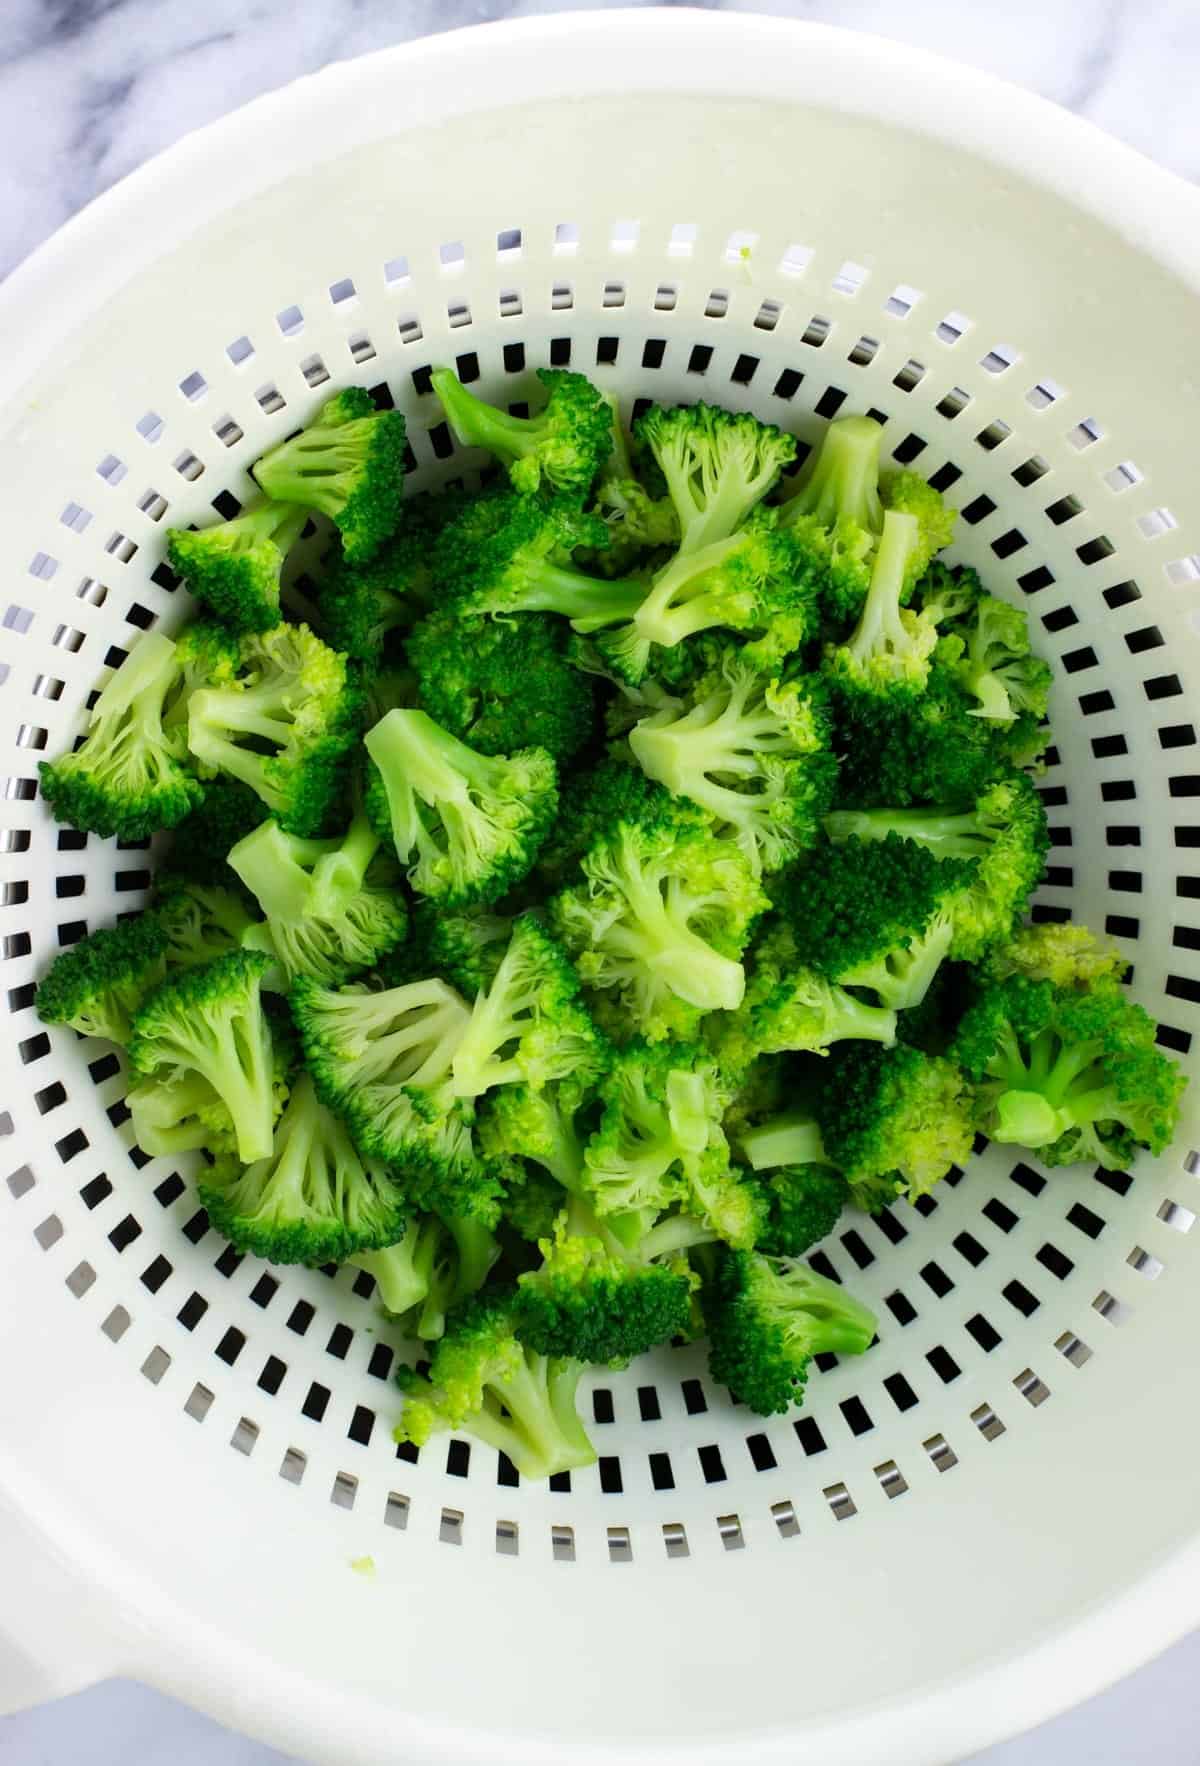 Drained blanched broccoli florets in a colander.